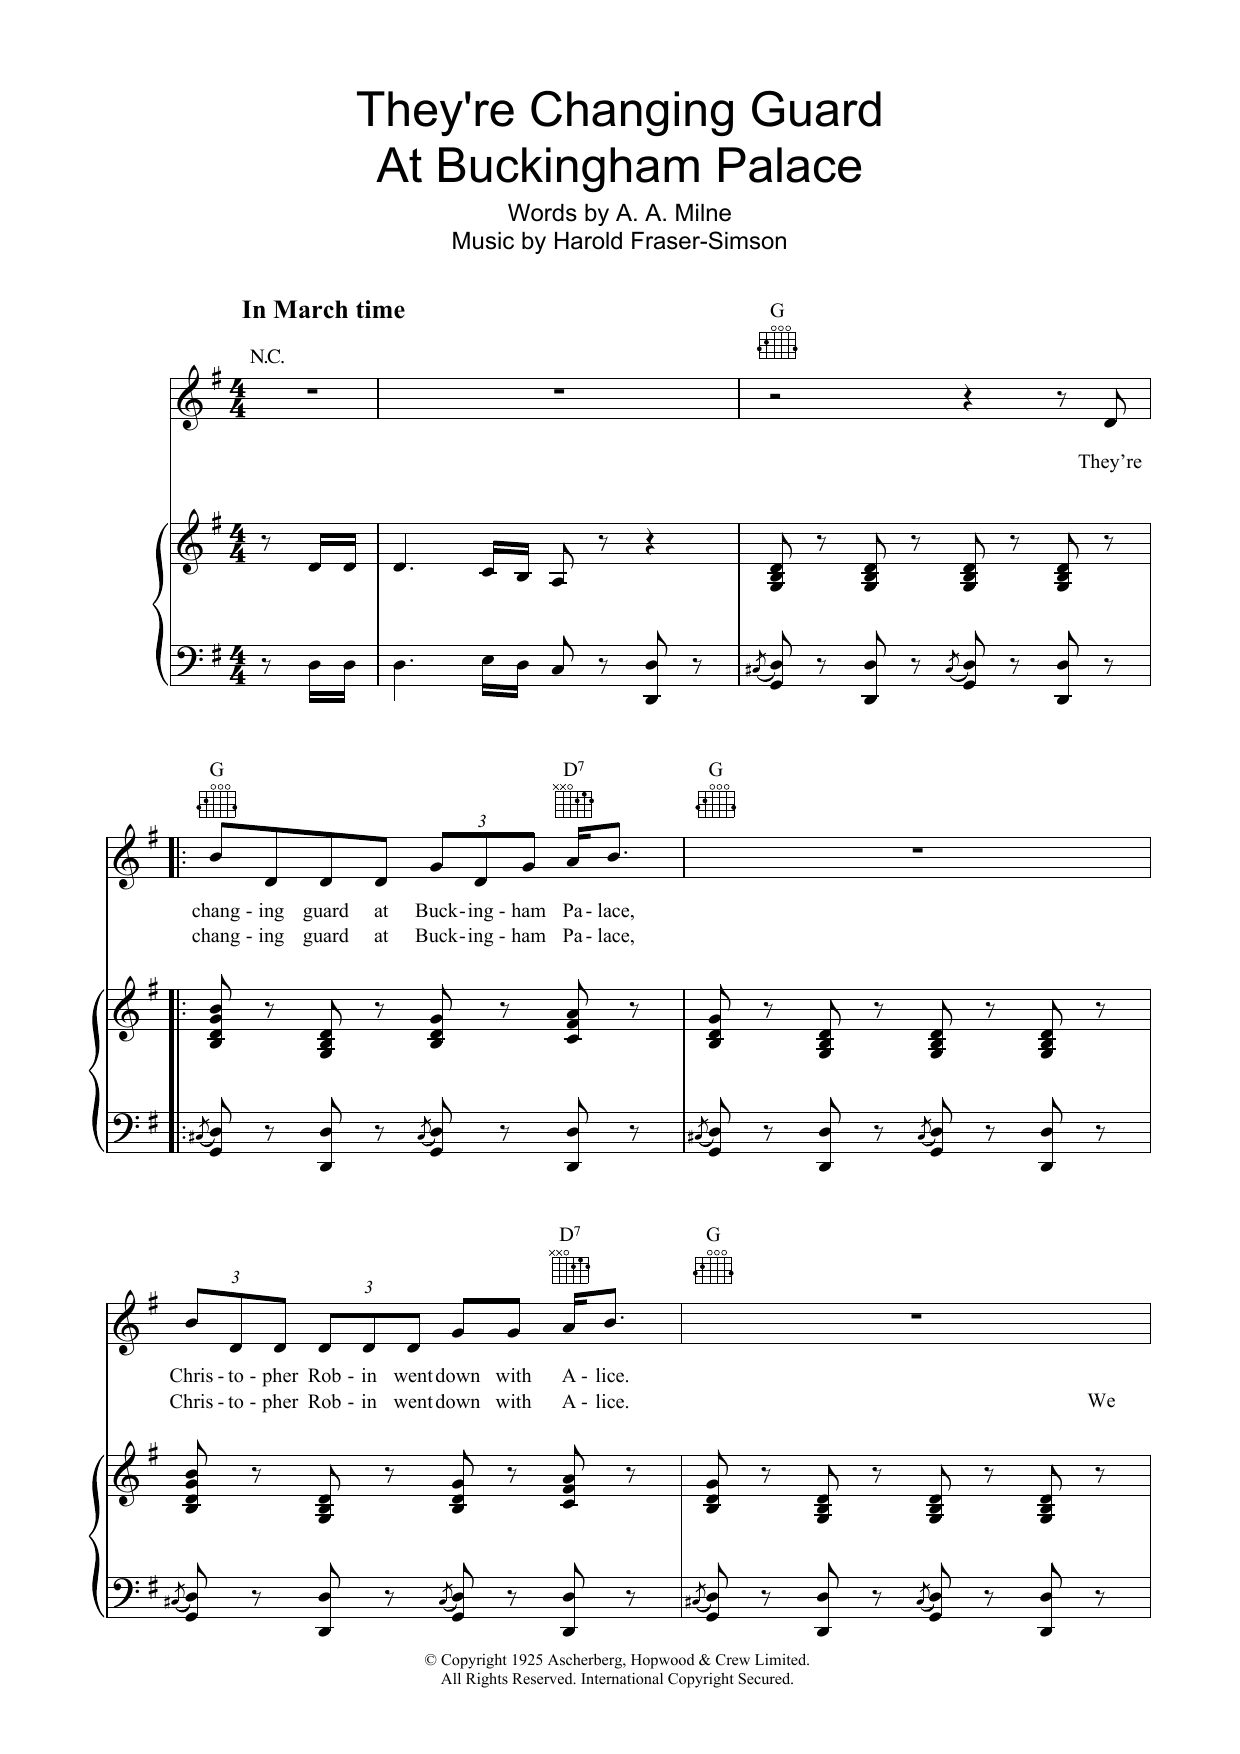 Download A.A. Milne They're Changing Guard At Buckingham Palace sheet music and printable PDF score & Easy Listening music notes